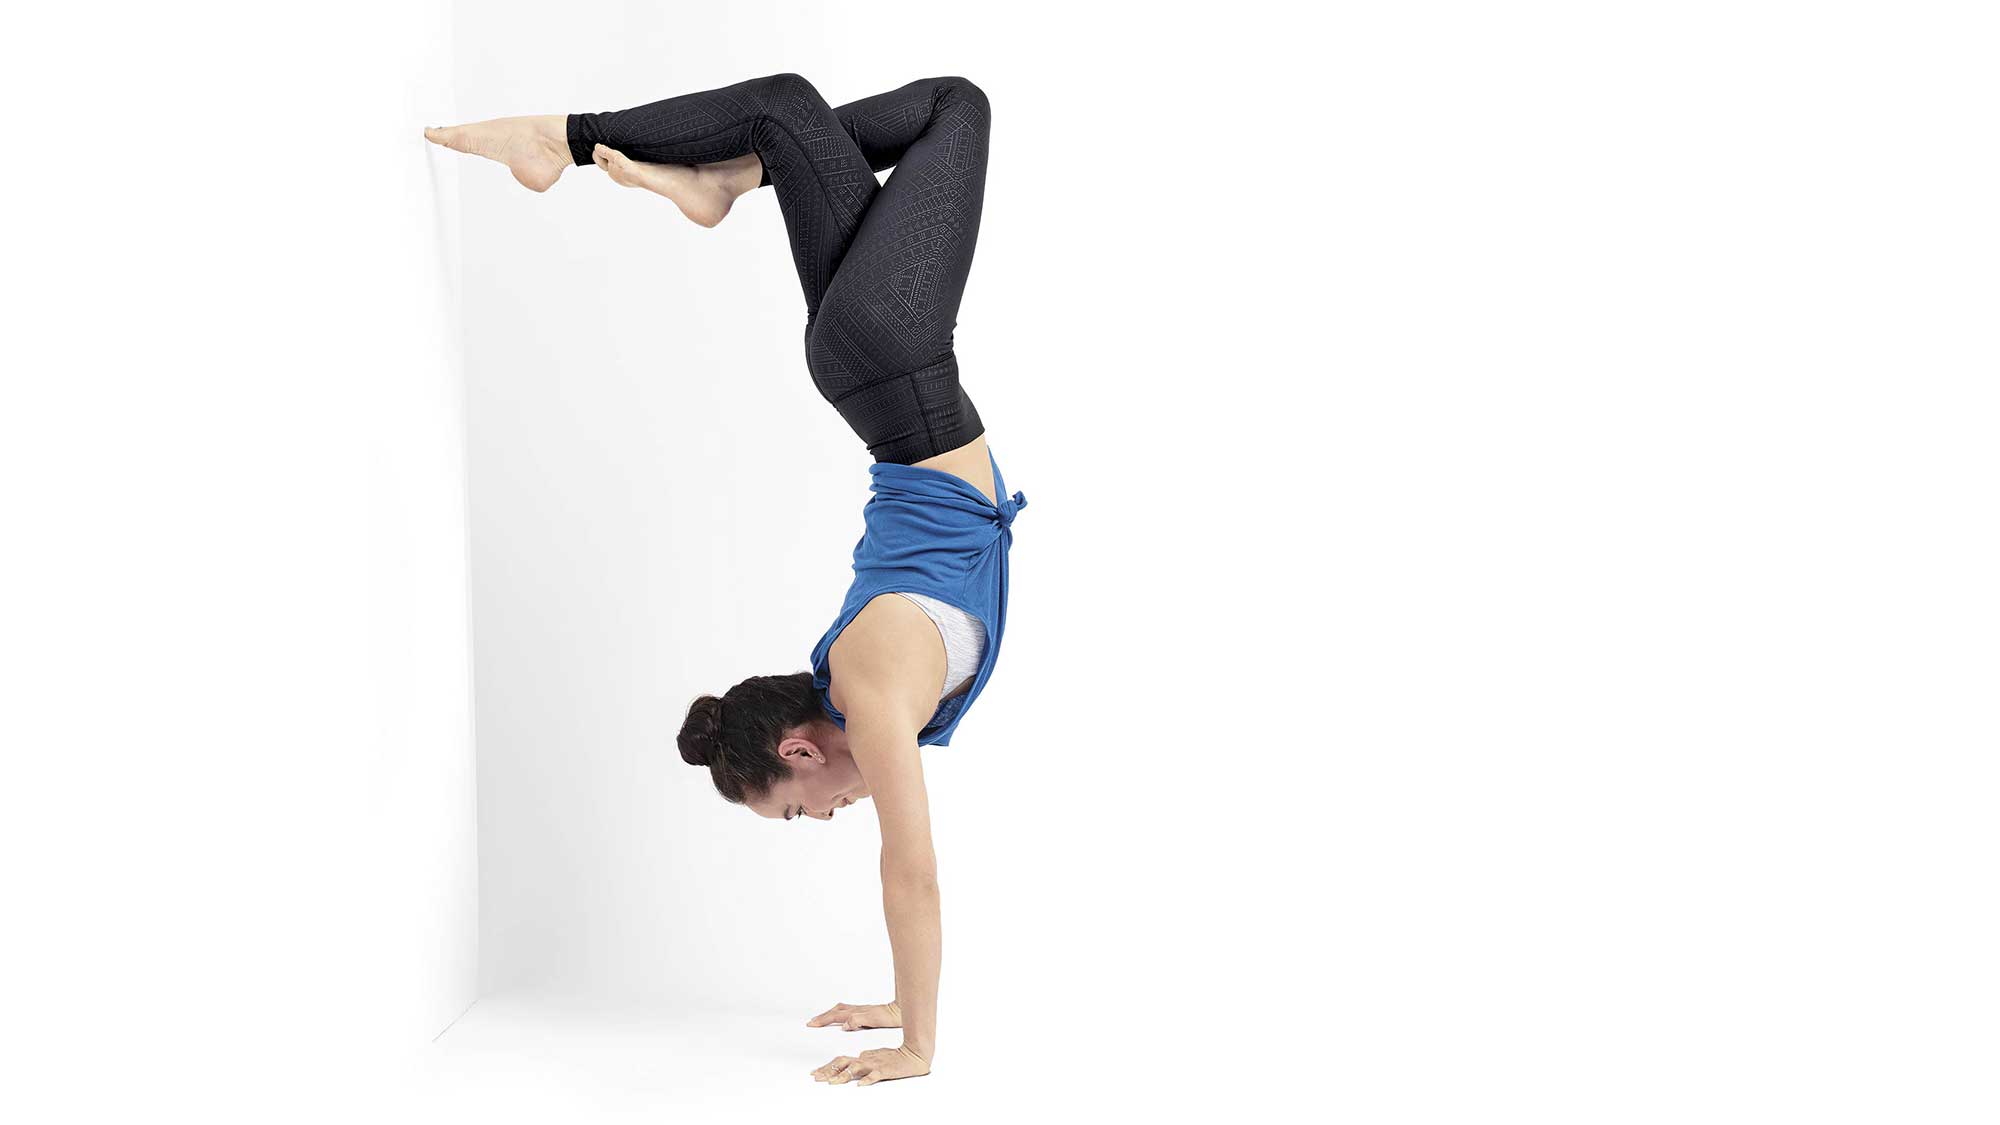 How to do a Handstand Part 4: Hips - A Guide To Nailing Your Handstand